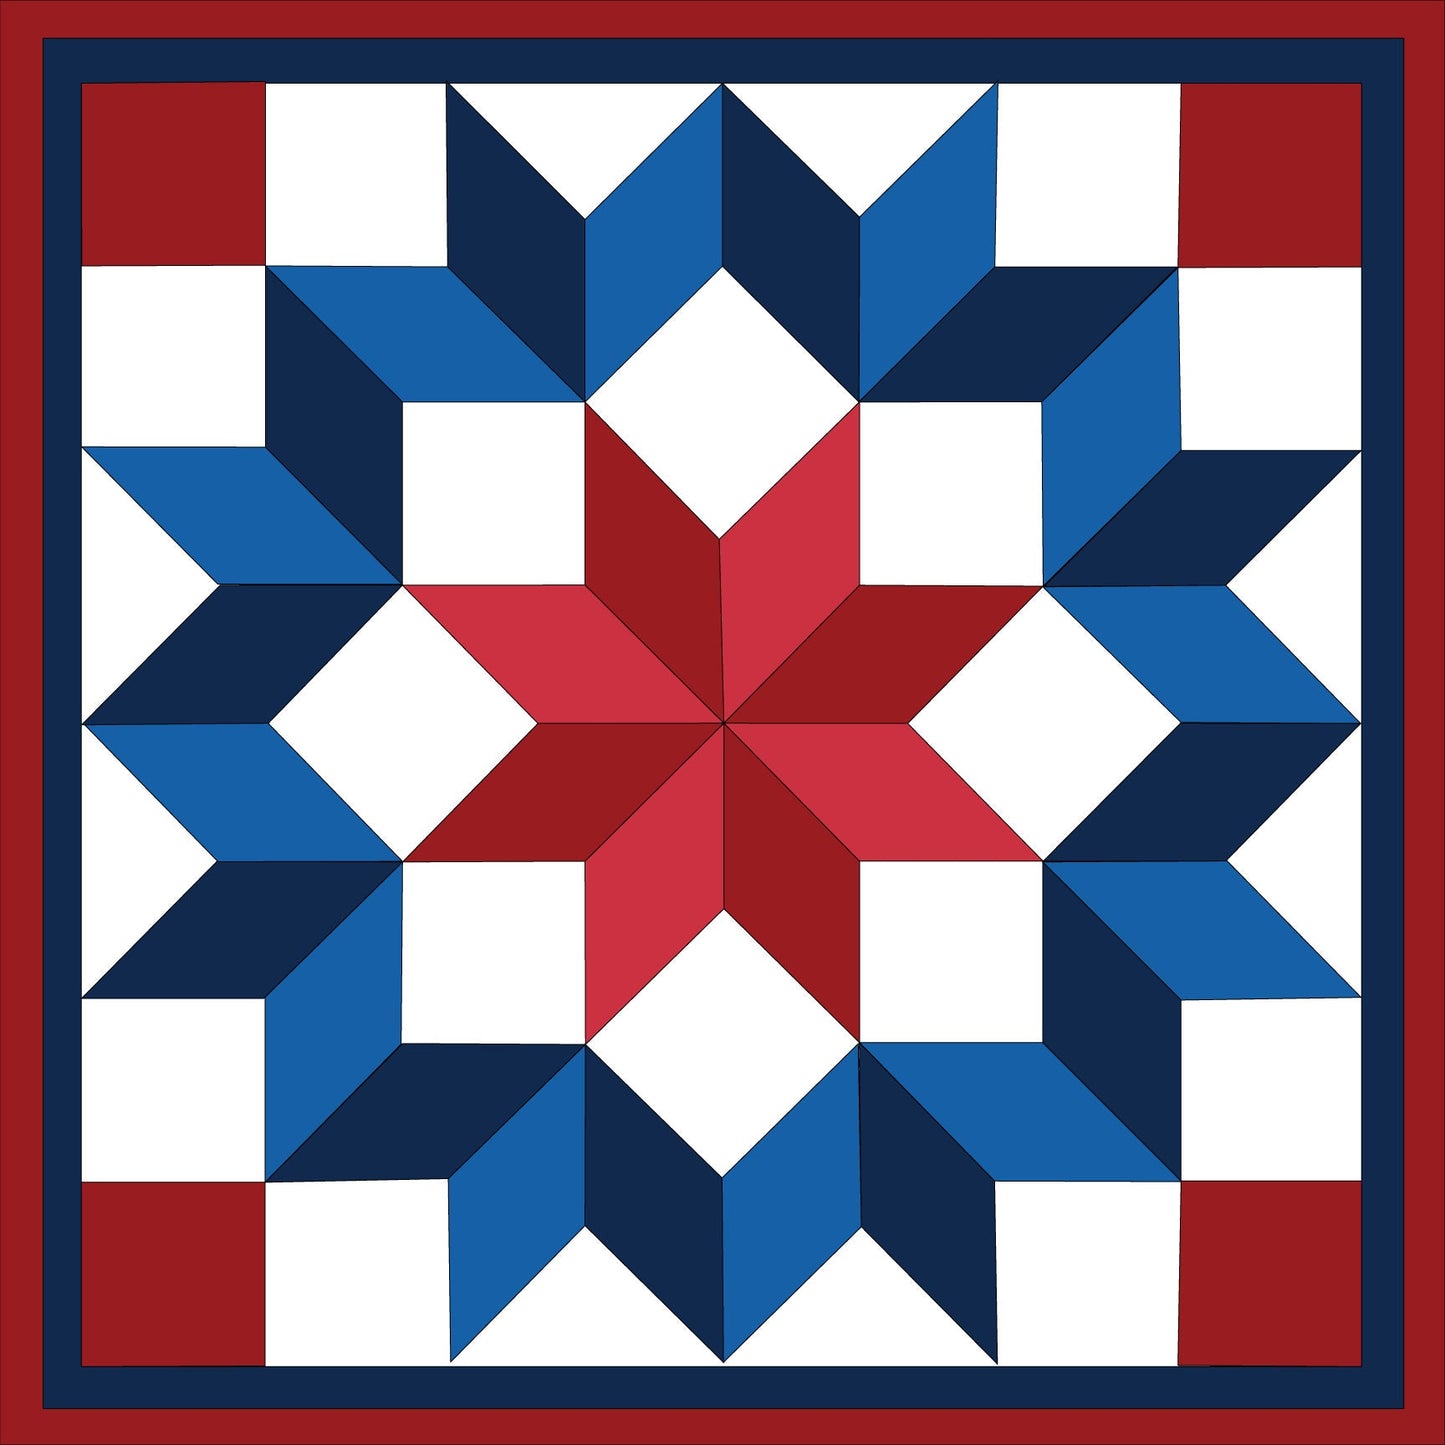 24x24" Carpenter Barn Quilt PDF Pattern, SVG Pattern, Wood quilt to paint for outdoors Bundle